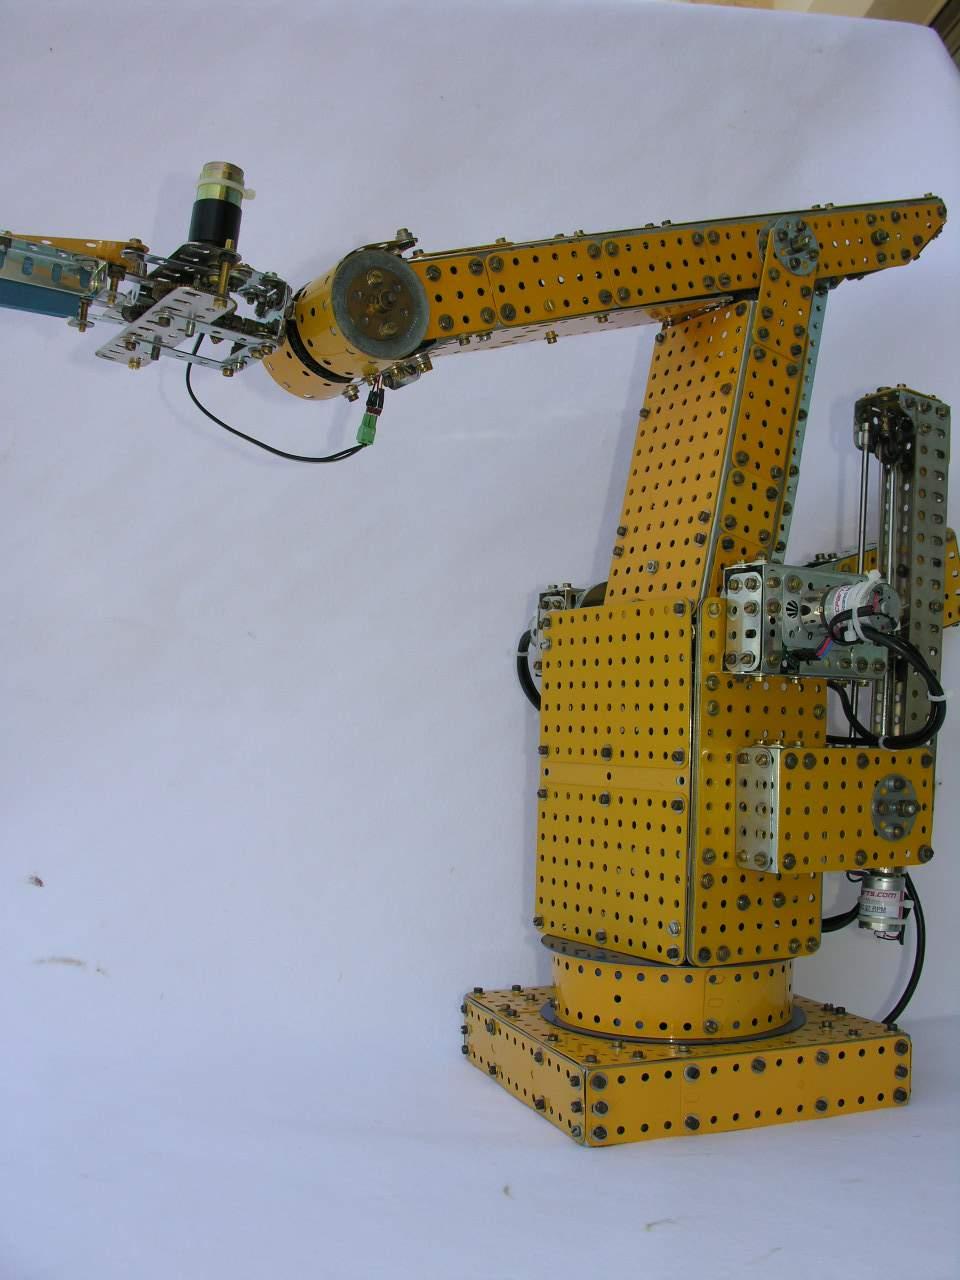 The structure of robot arms can be discussed in a general fashion. Robot arms are made up of links and joints.